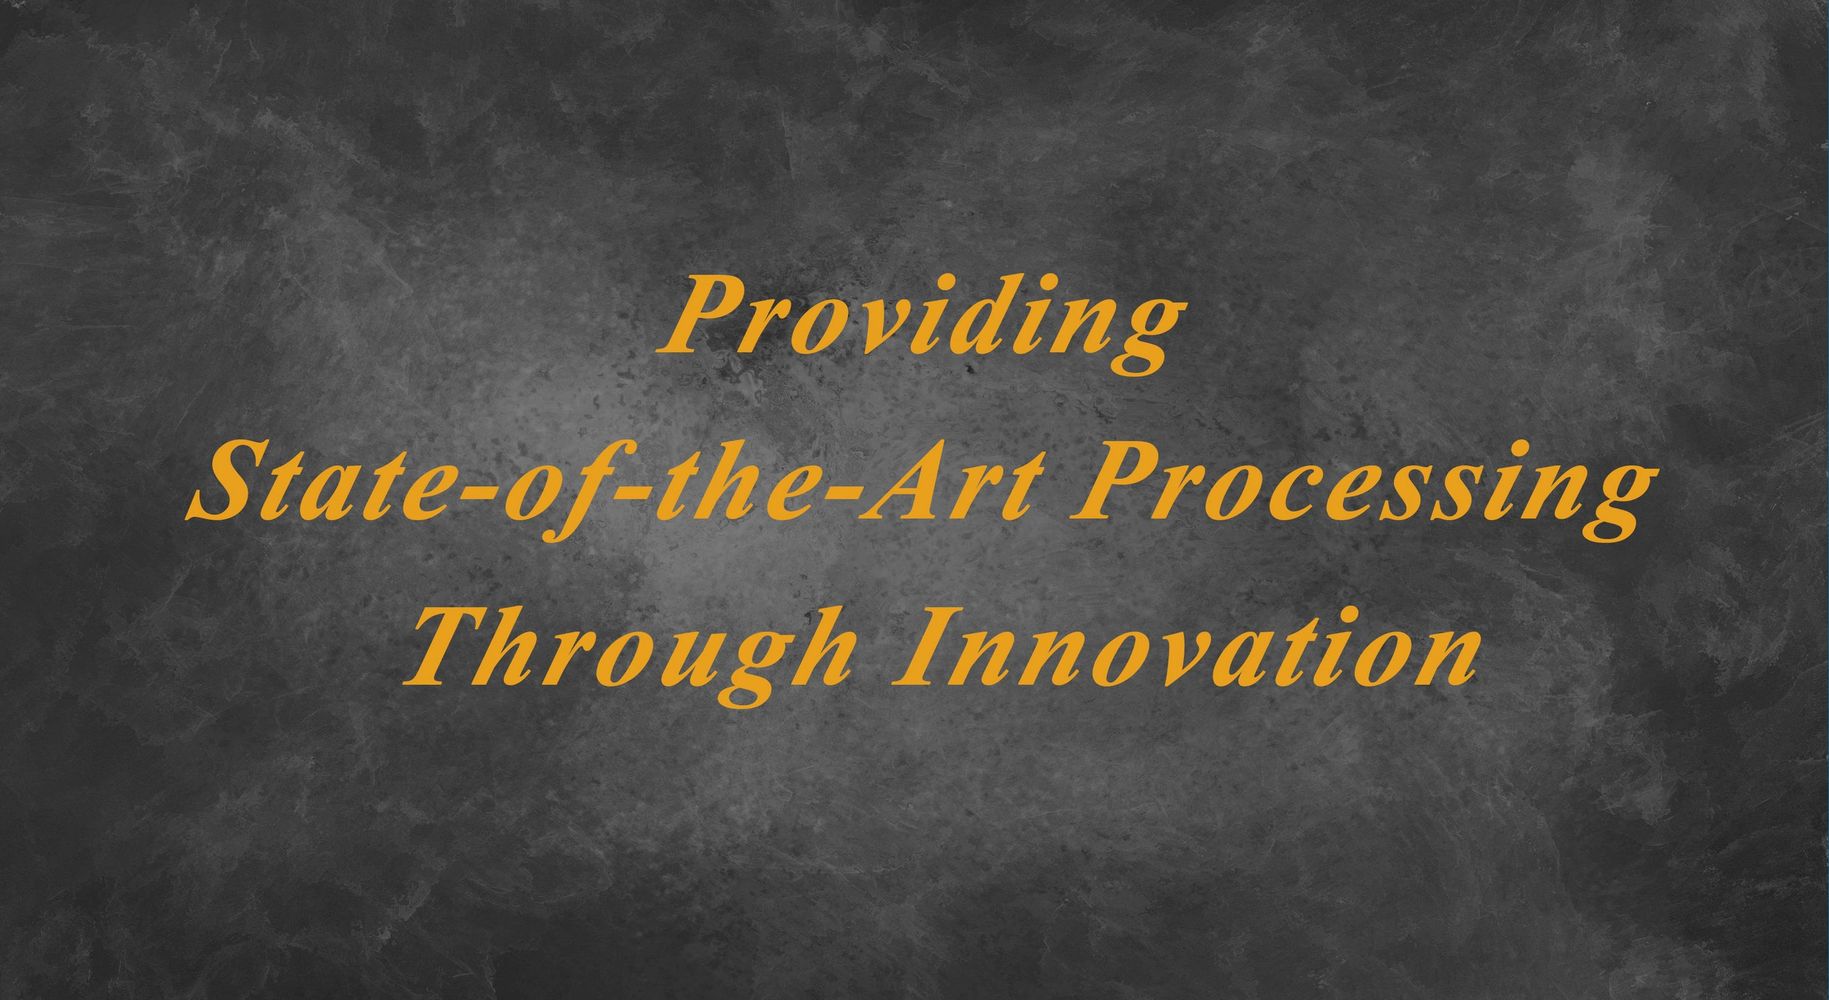 Providing State-of-the-Art Processing Through Innovation